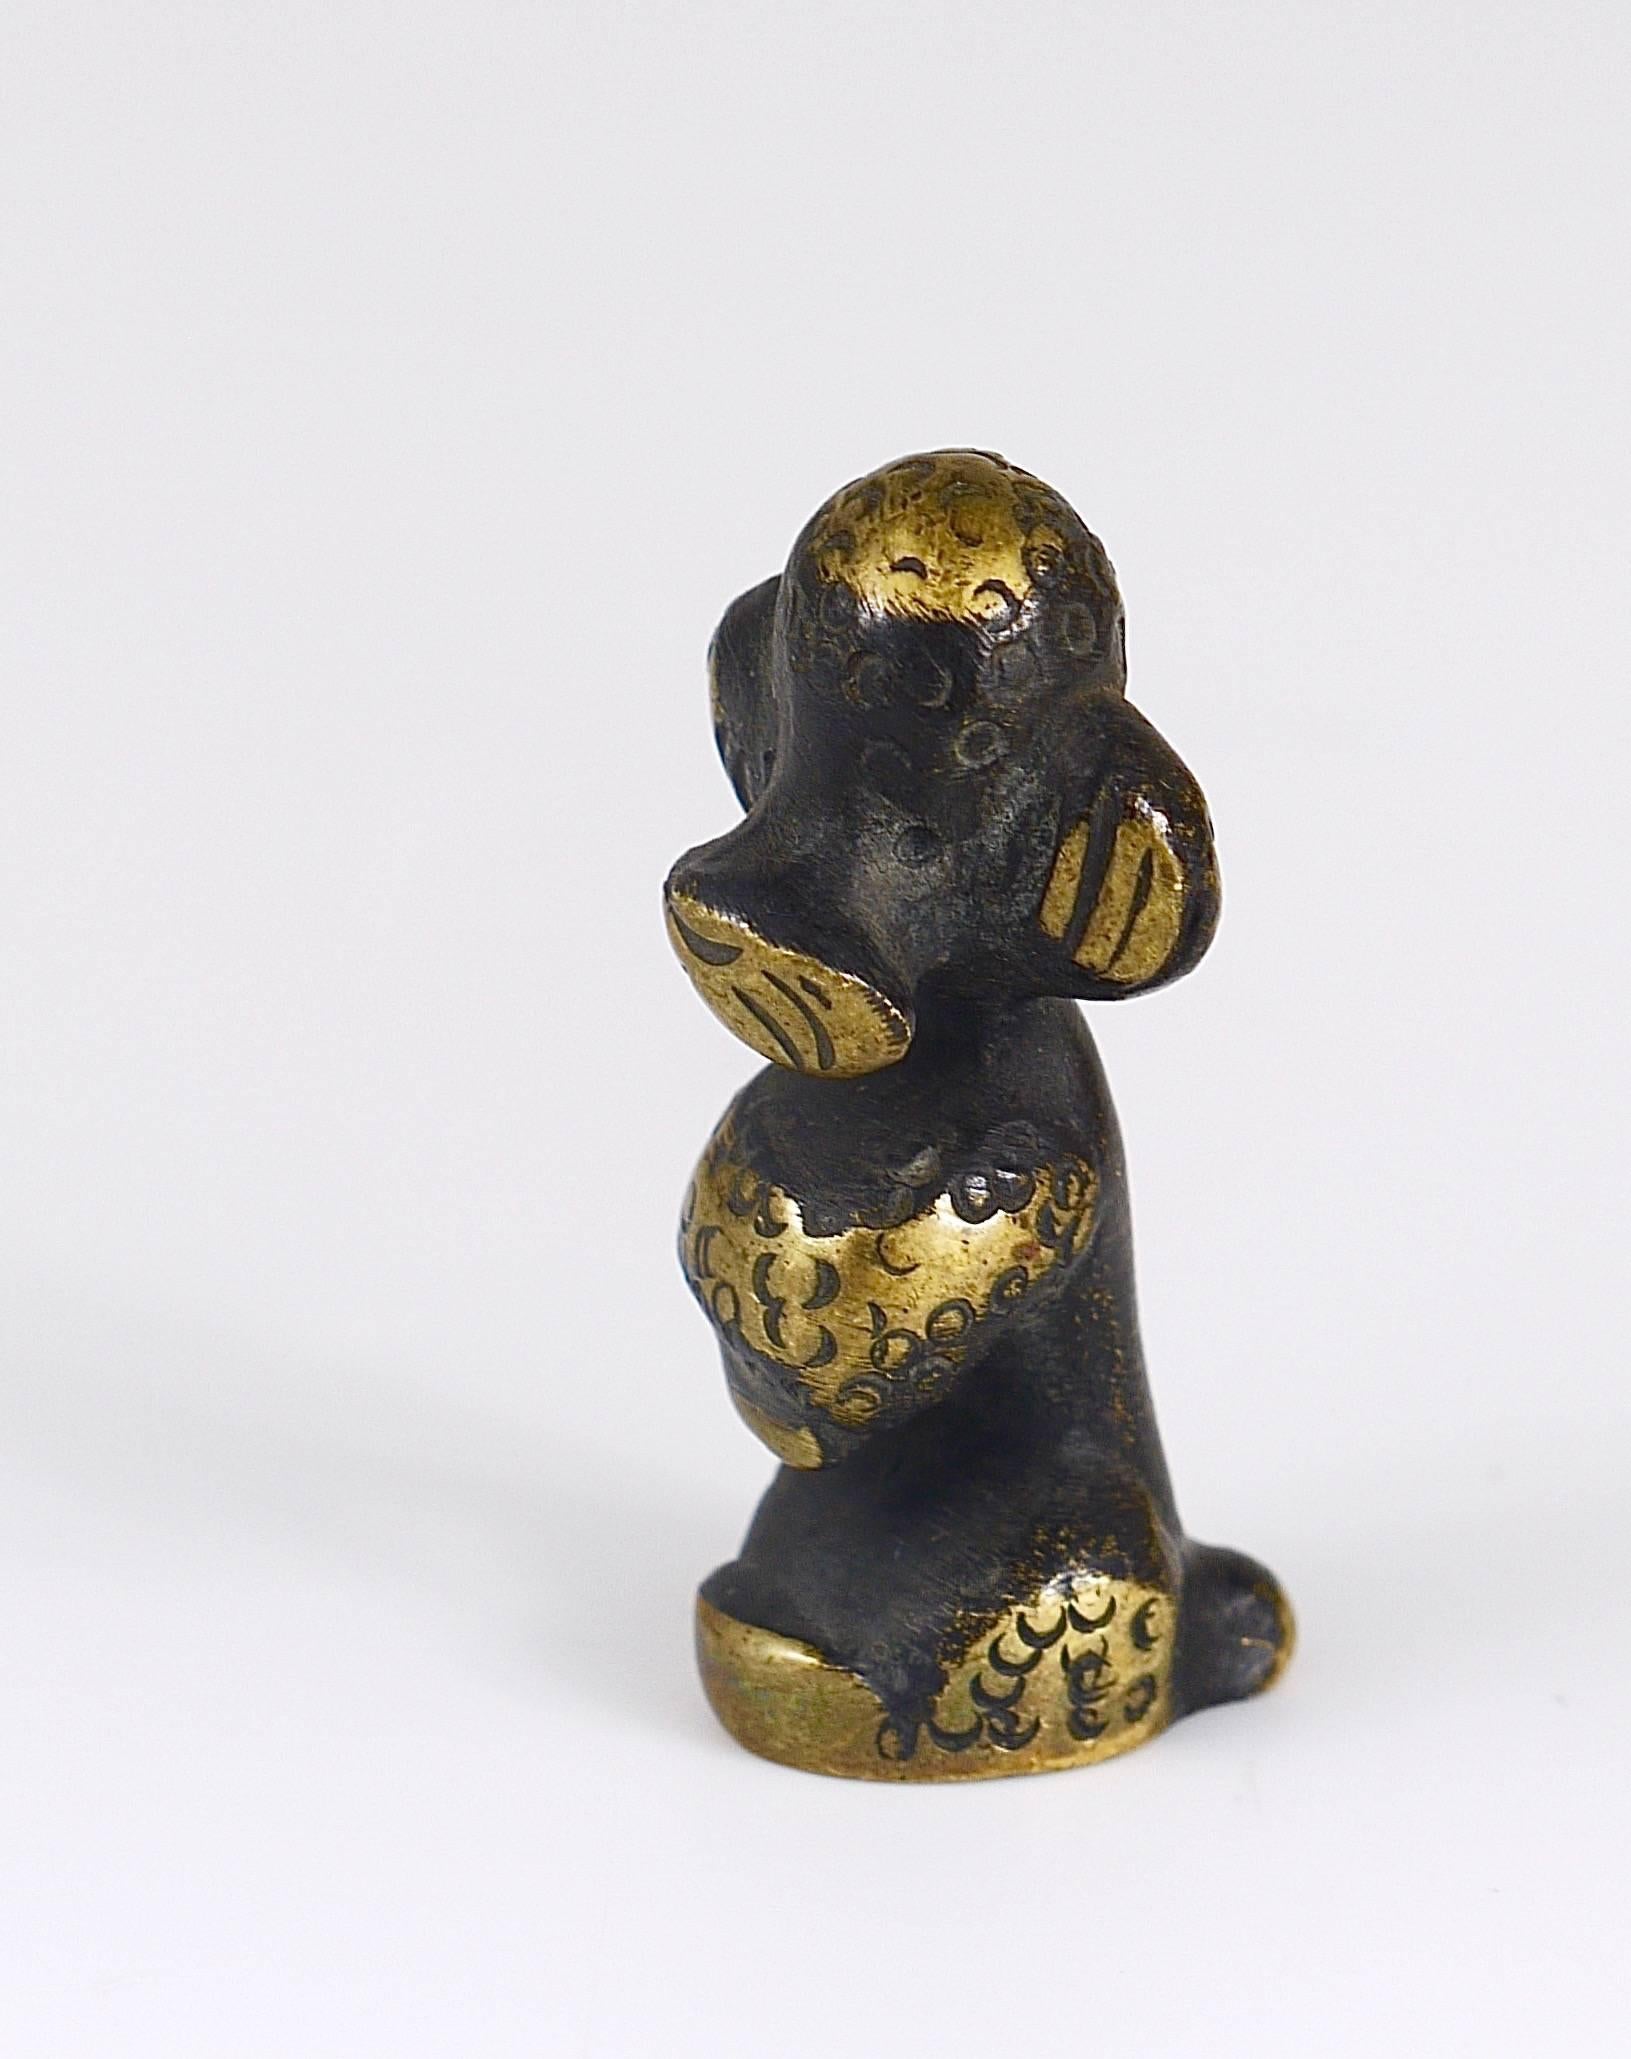 A charming poodle figurine, made of brass designed by Walter Bosse, executed in the 1950s by Hertha Baller, Austria. In excellent condition.